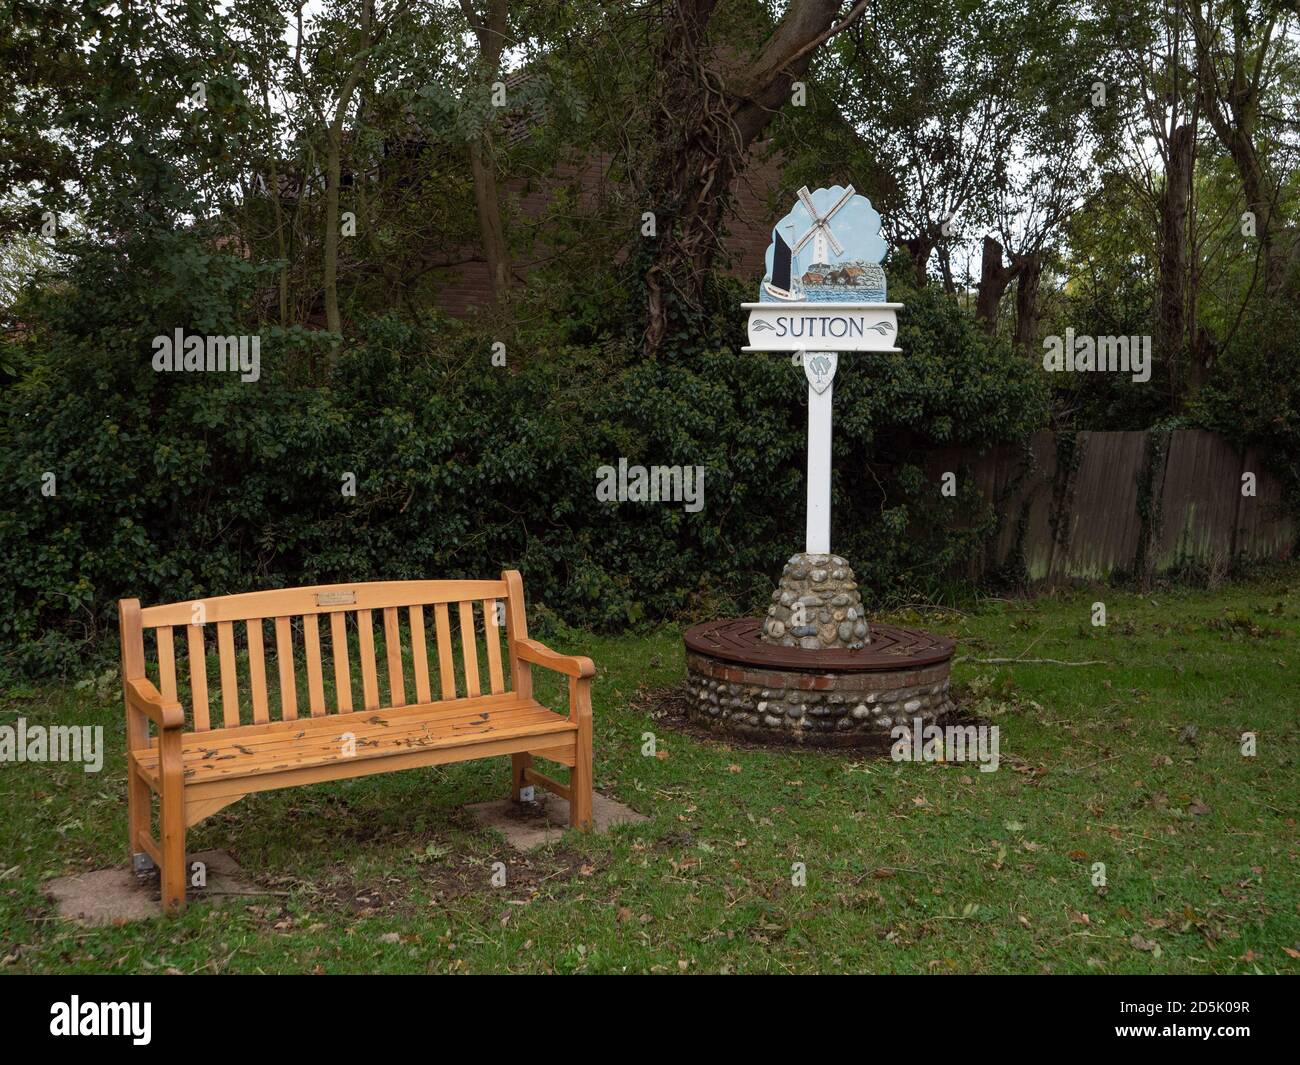 Traditional village sign with wooden bench at Sutton, Norfolk, UK Stock Photo